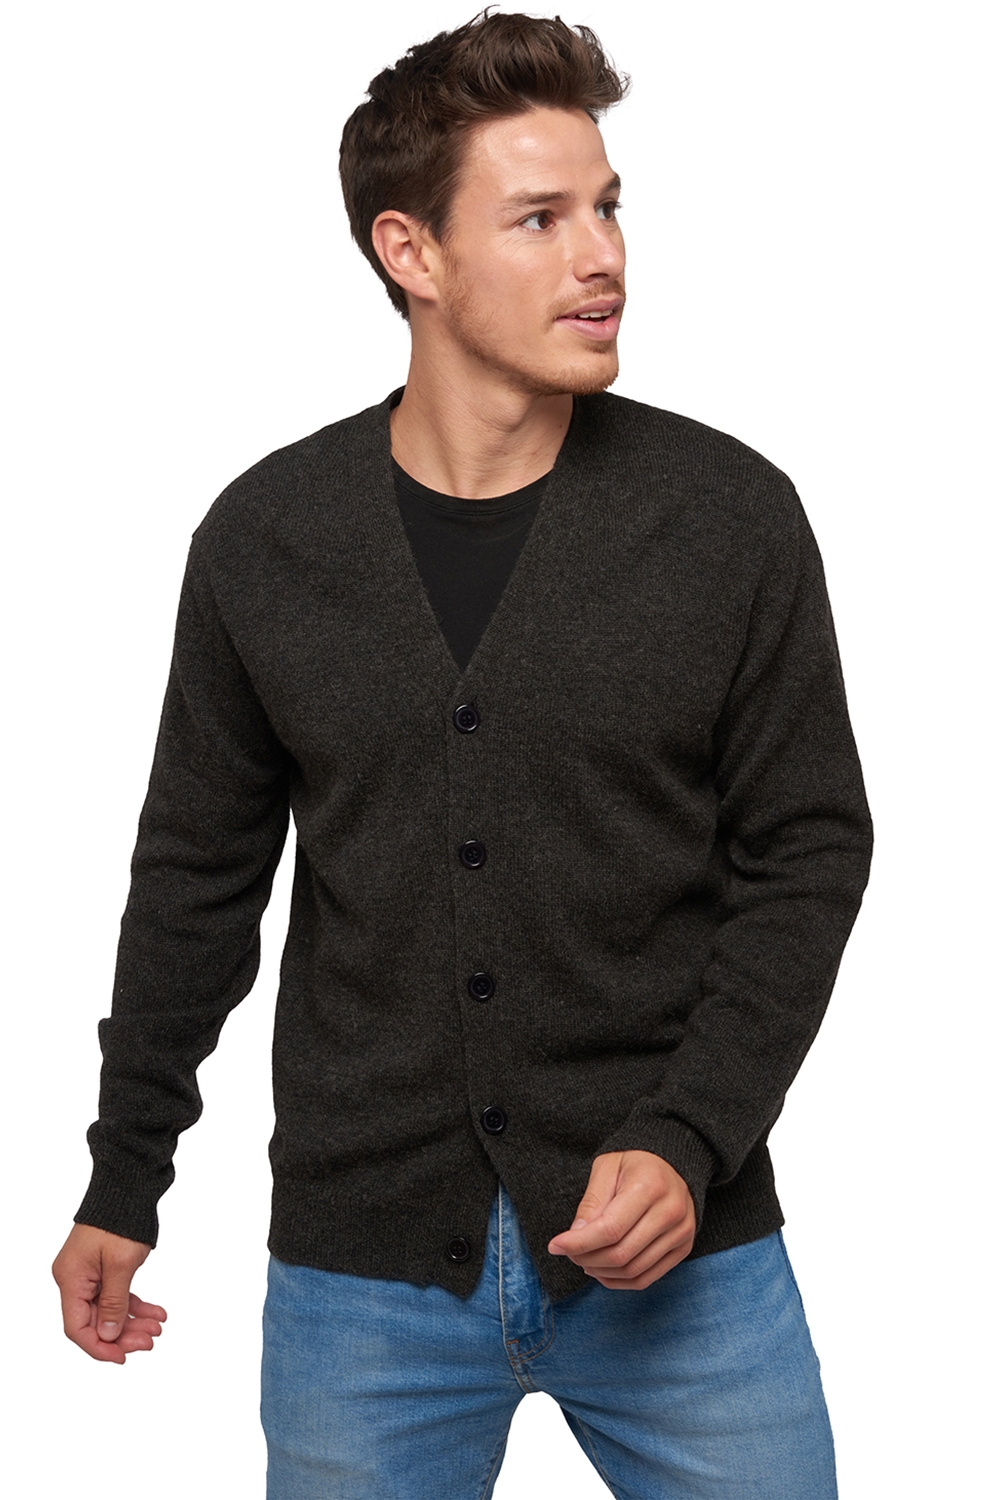 Chameau pull homme cameleon anthracite xl